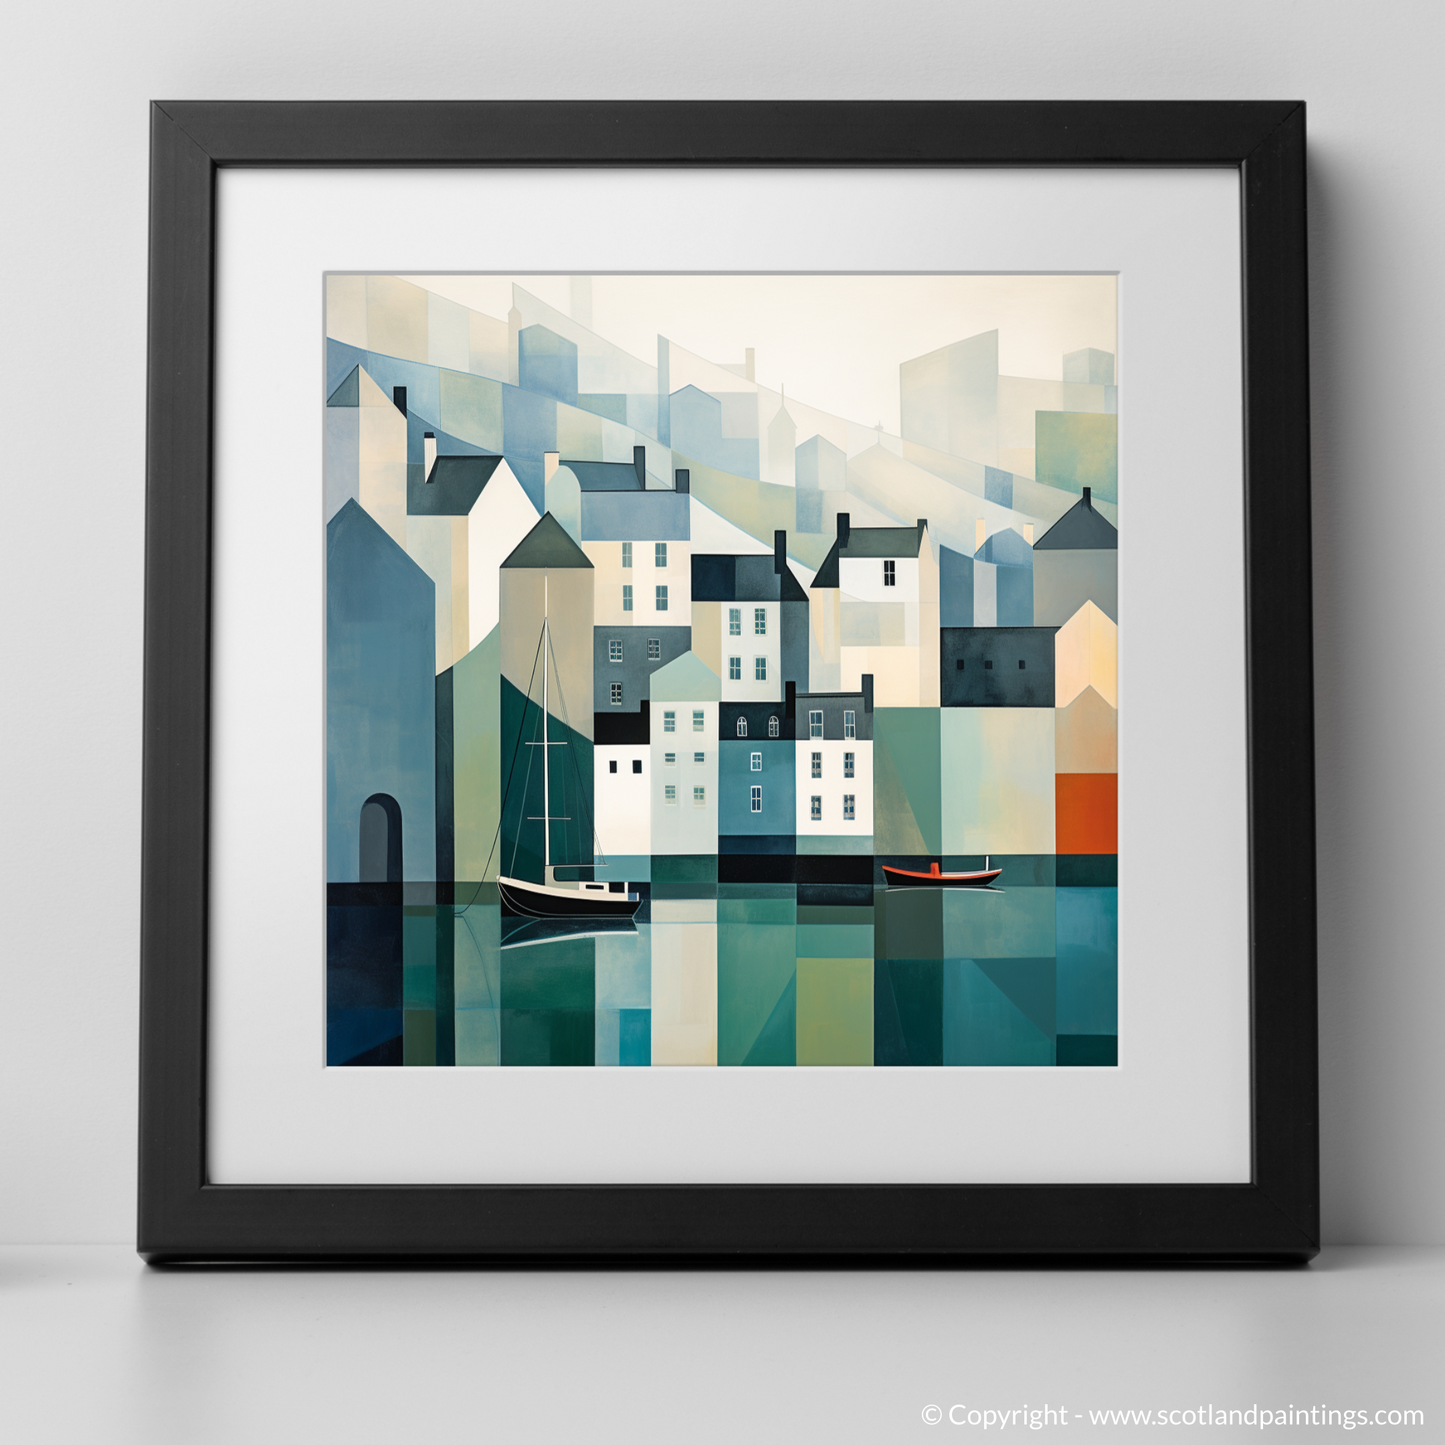 Serenity of Portree Harbour: A Minimalist Masterpiece